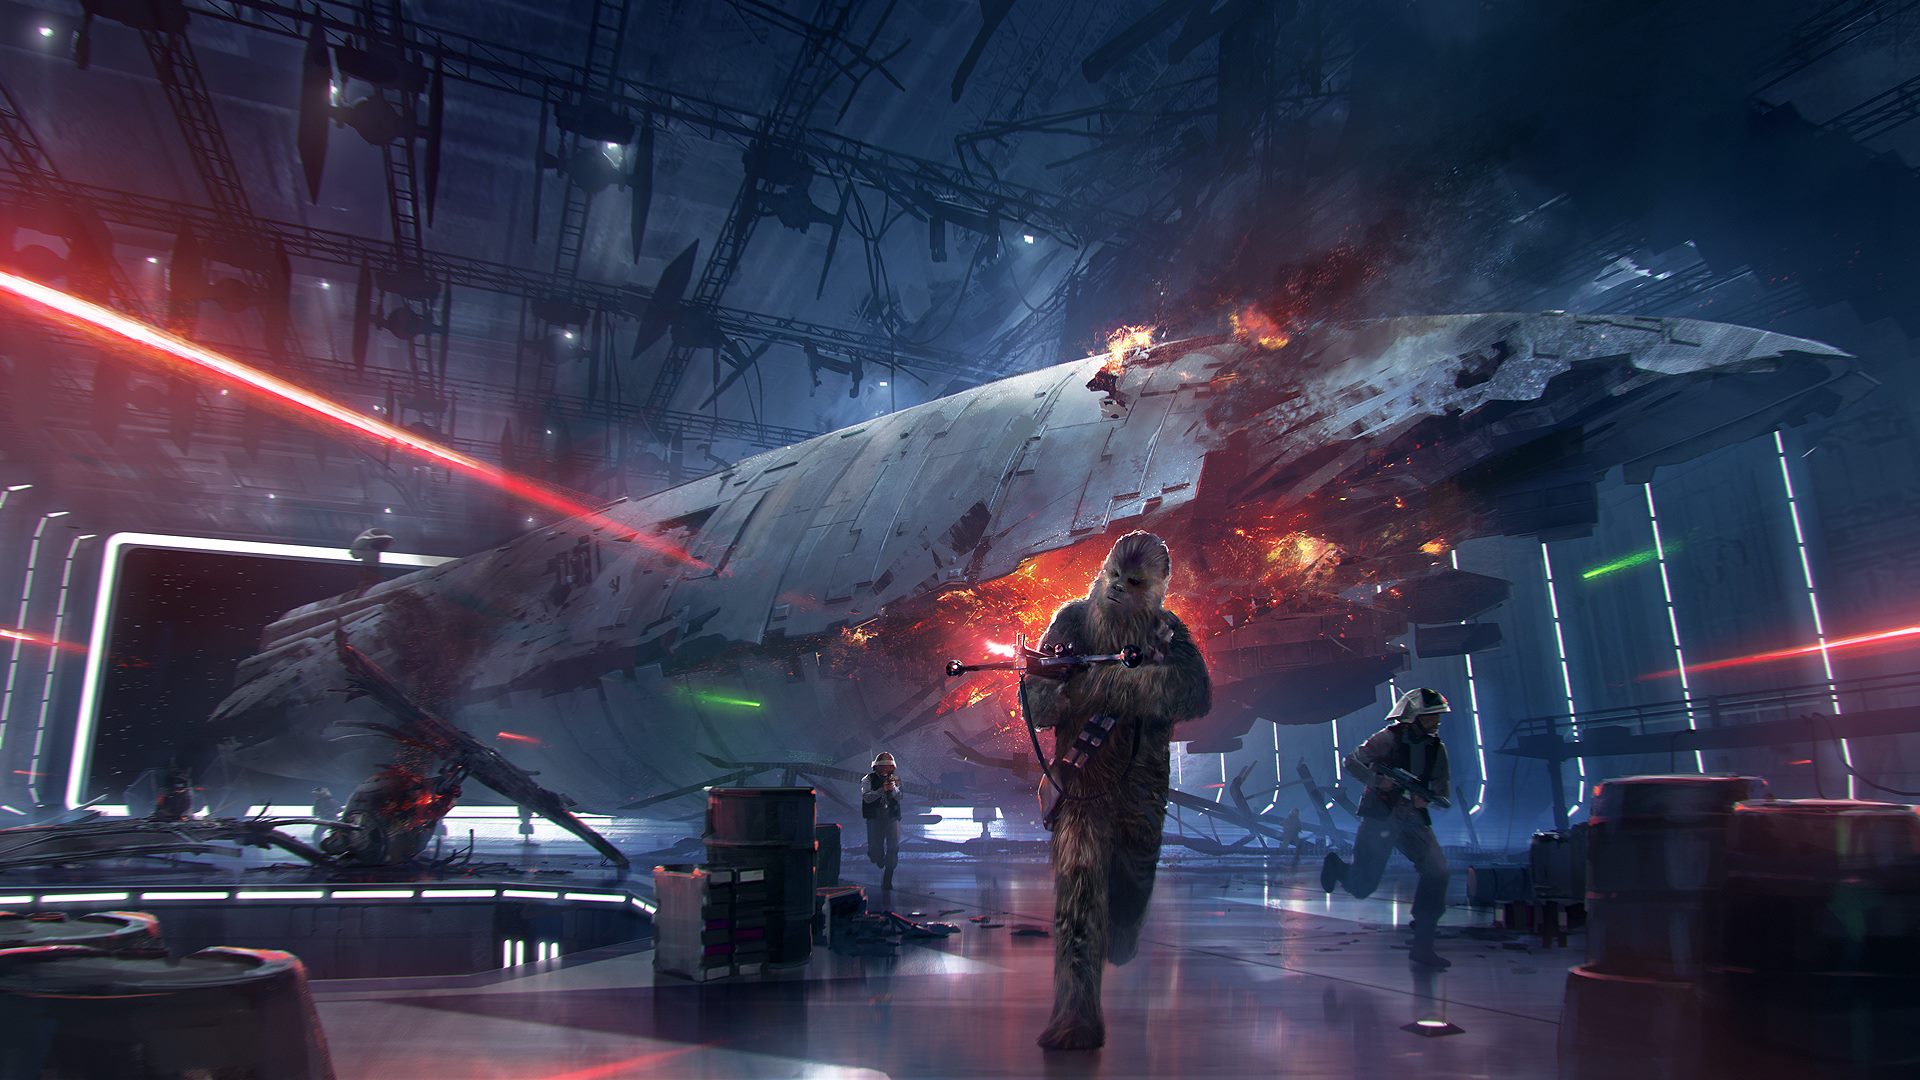 Chewbacca featured in concept art for the Death Star DLC.